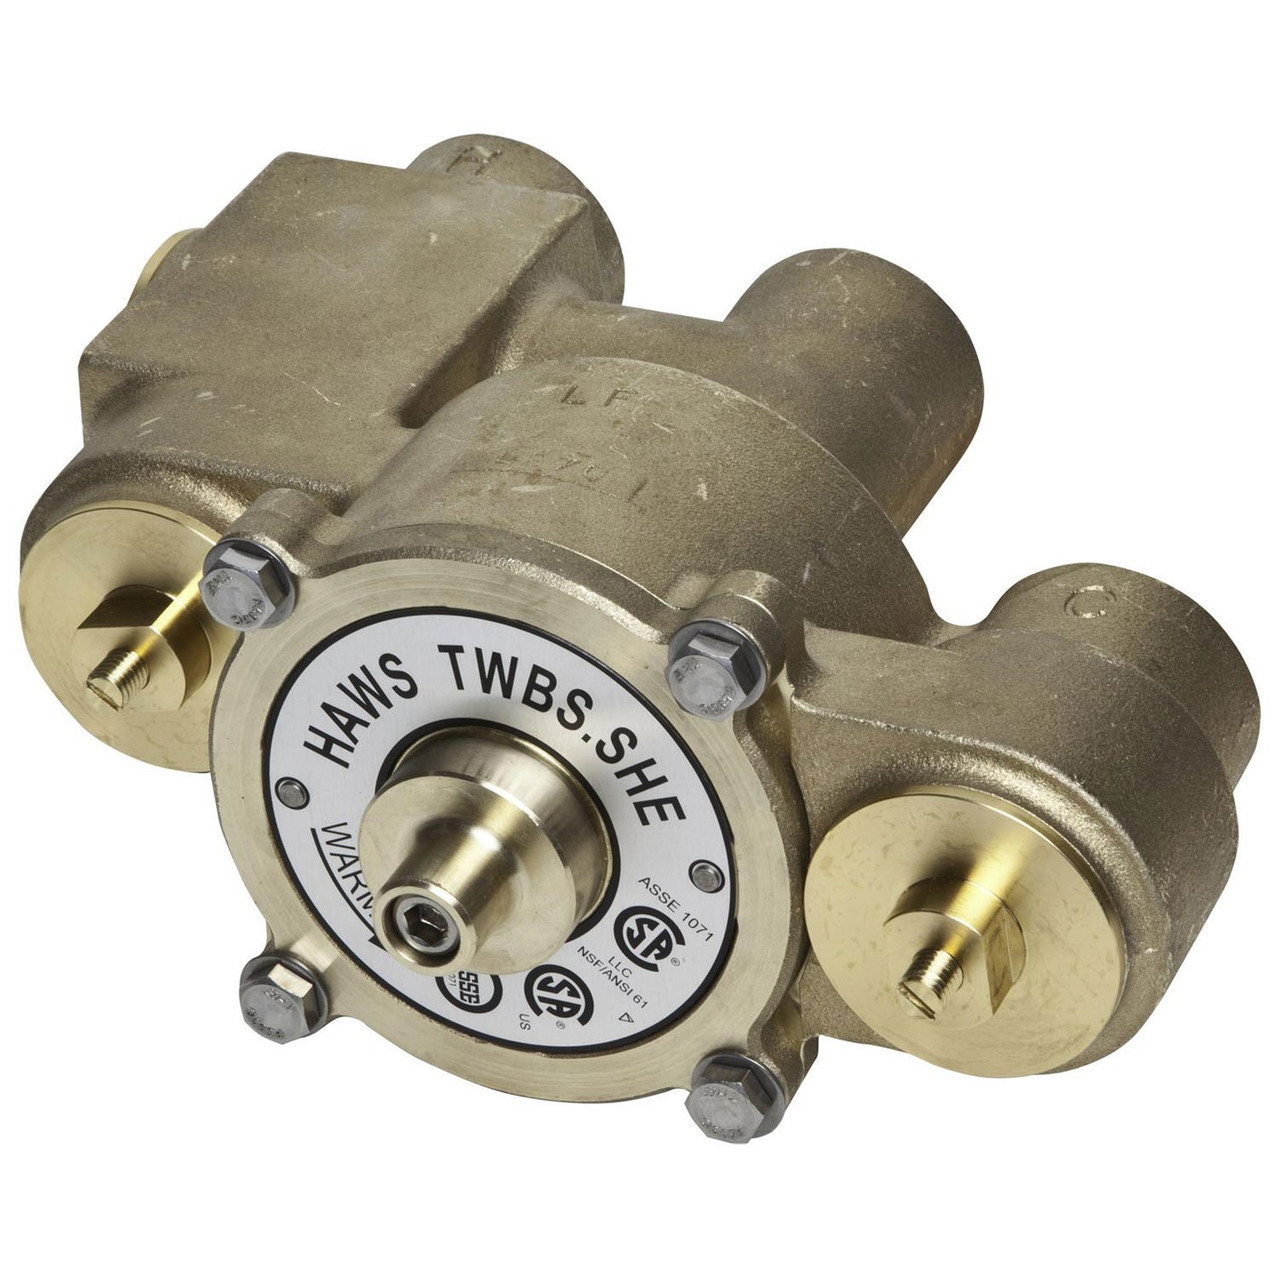 Haws TWBS.SHE Lead-Free Thermostatic Mixing Emergency Valve, 74 gpm Flow Rate